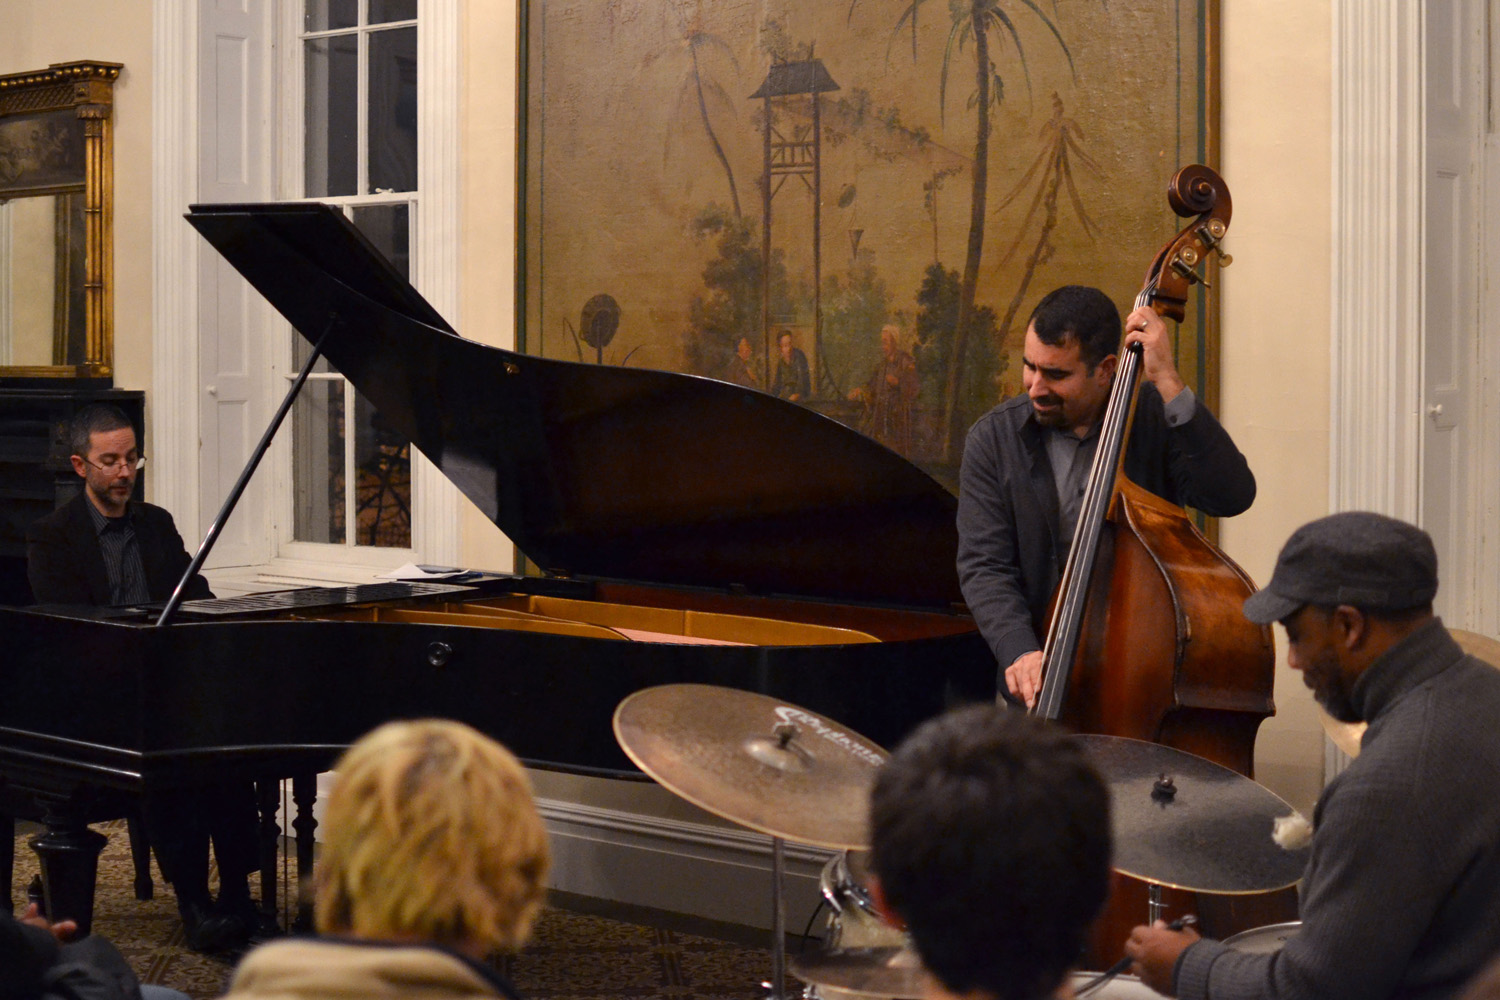 Graduate Liberal Studies hosted a combined concert and talk on Monday, November 30th entitled Monk and Mingus: The Cutting Edge of Jazz. Jazz Ensemble Coach Noah Baerman performed on piano, accompanied by bassist Henry Lugo, and Visiting Assistant Professor of Music Pheeoroan akLaff on percussion.